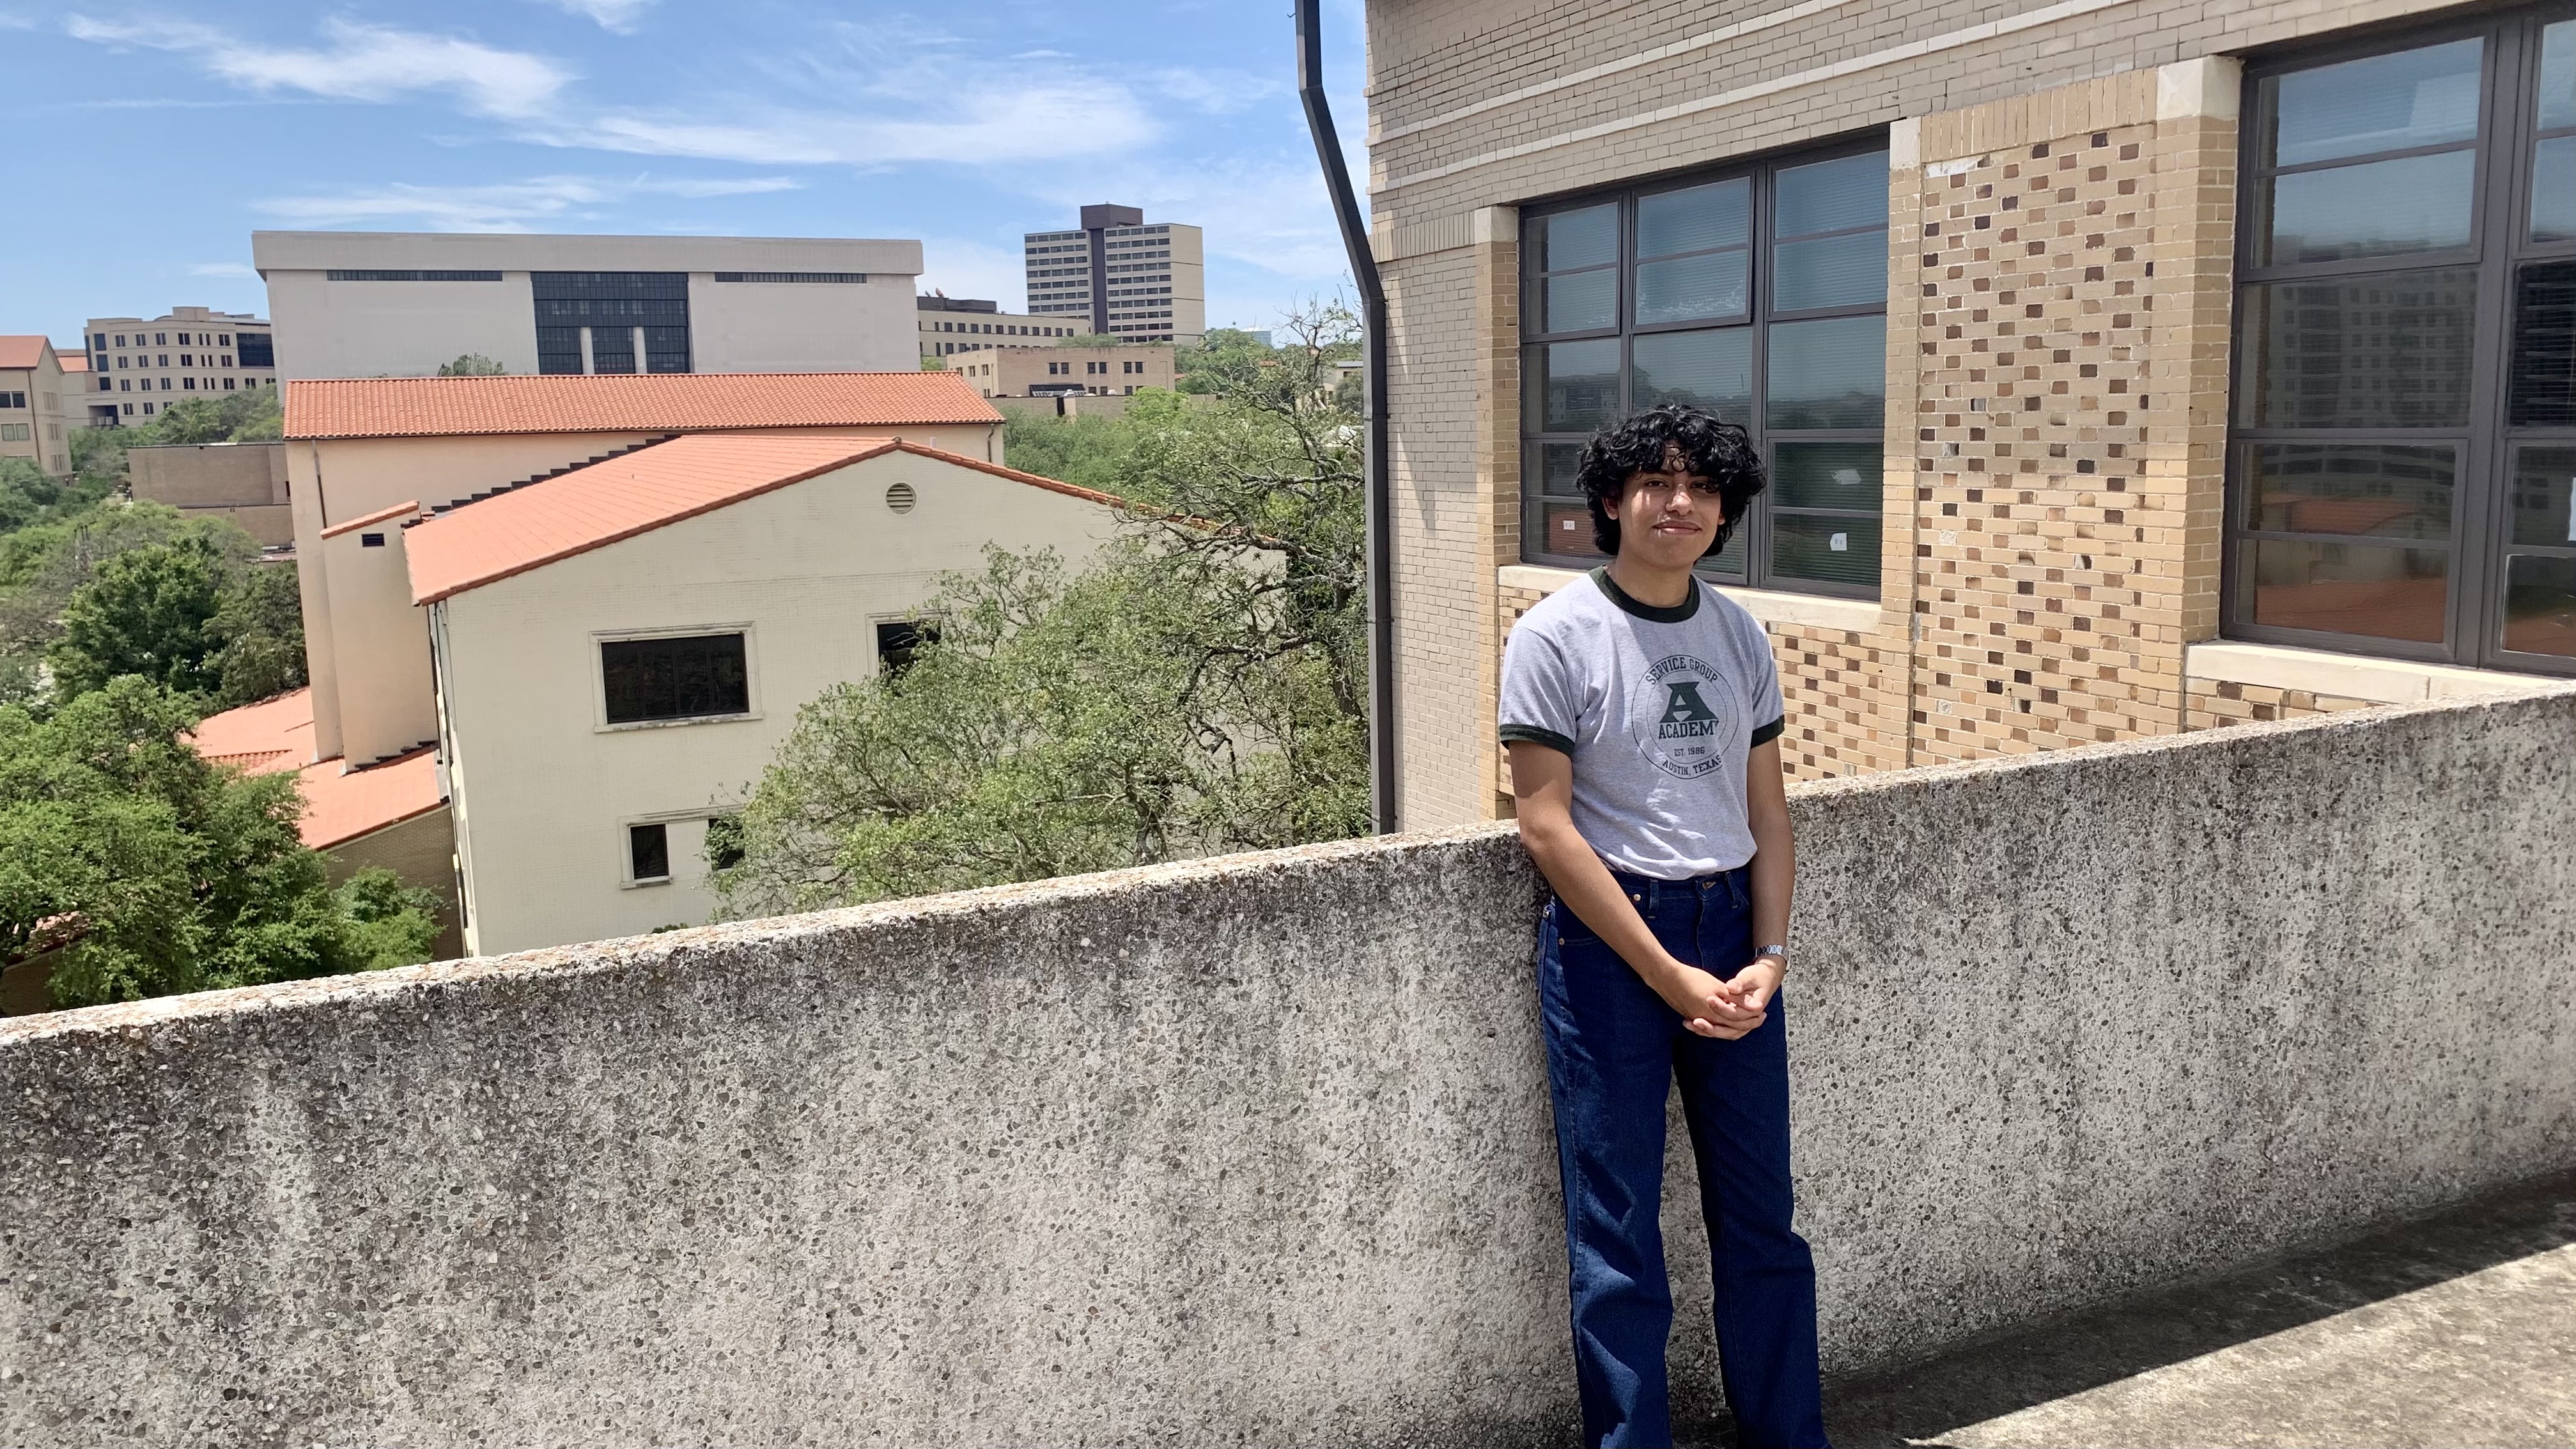 Jesse Rodriguez is posing with his finger tied on balcony overlooking the Texas State campus.